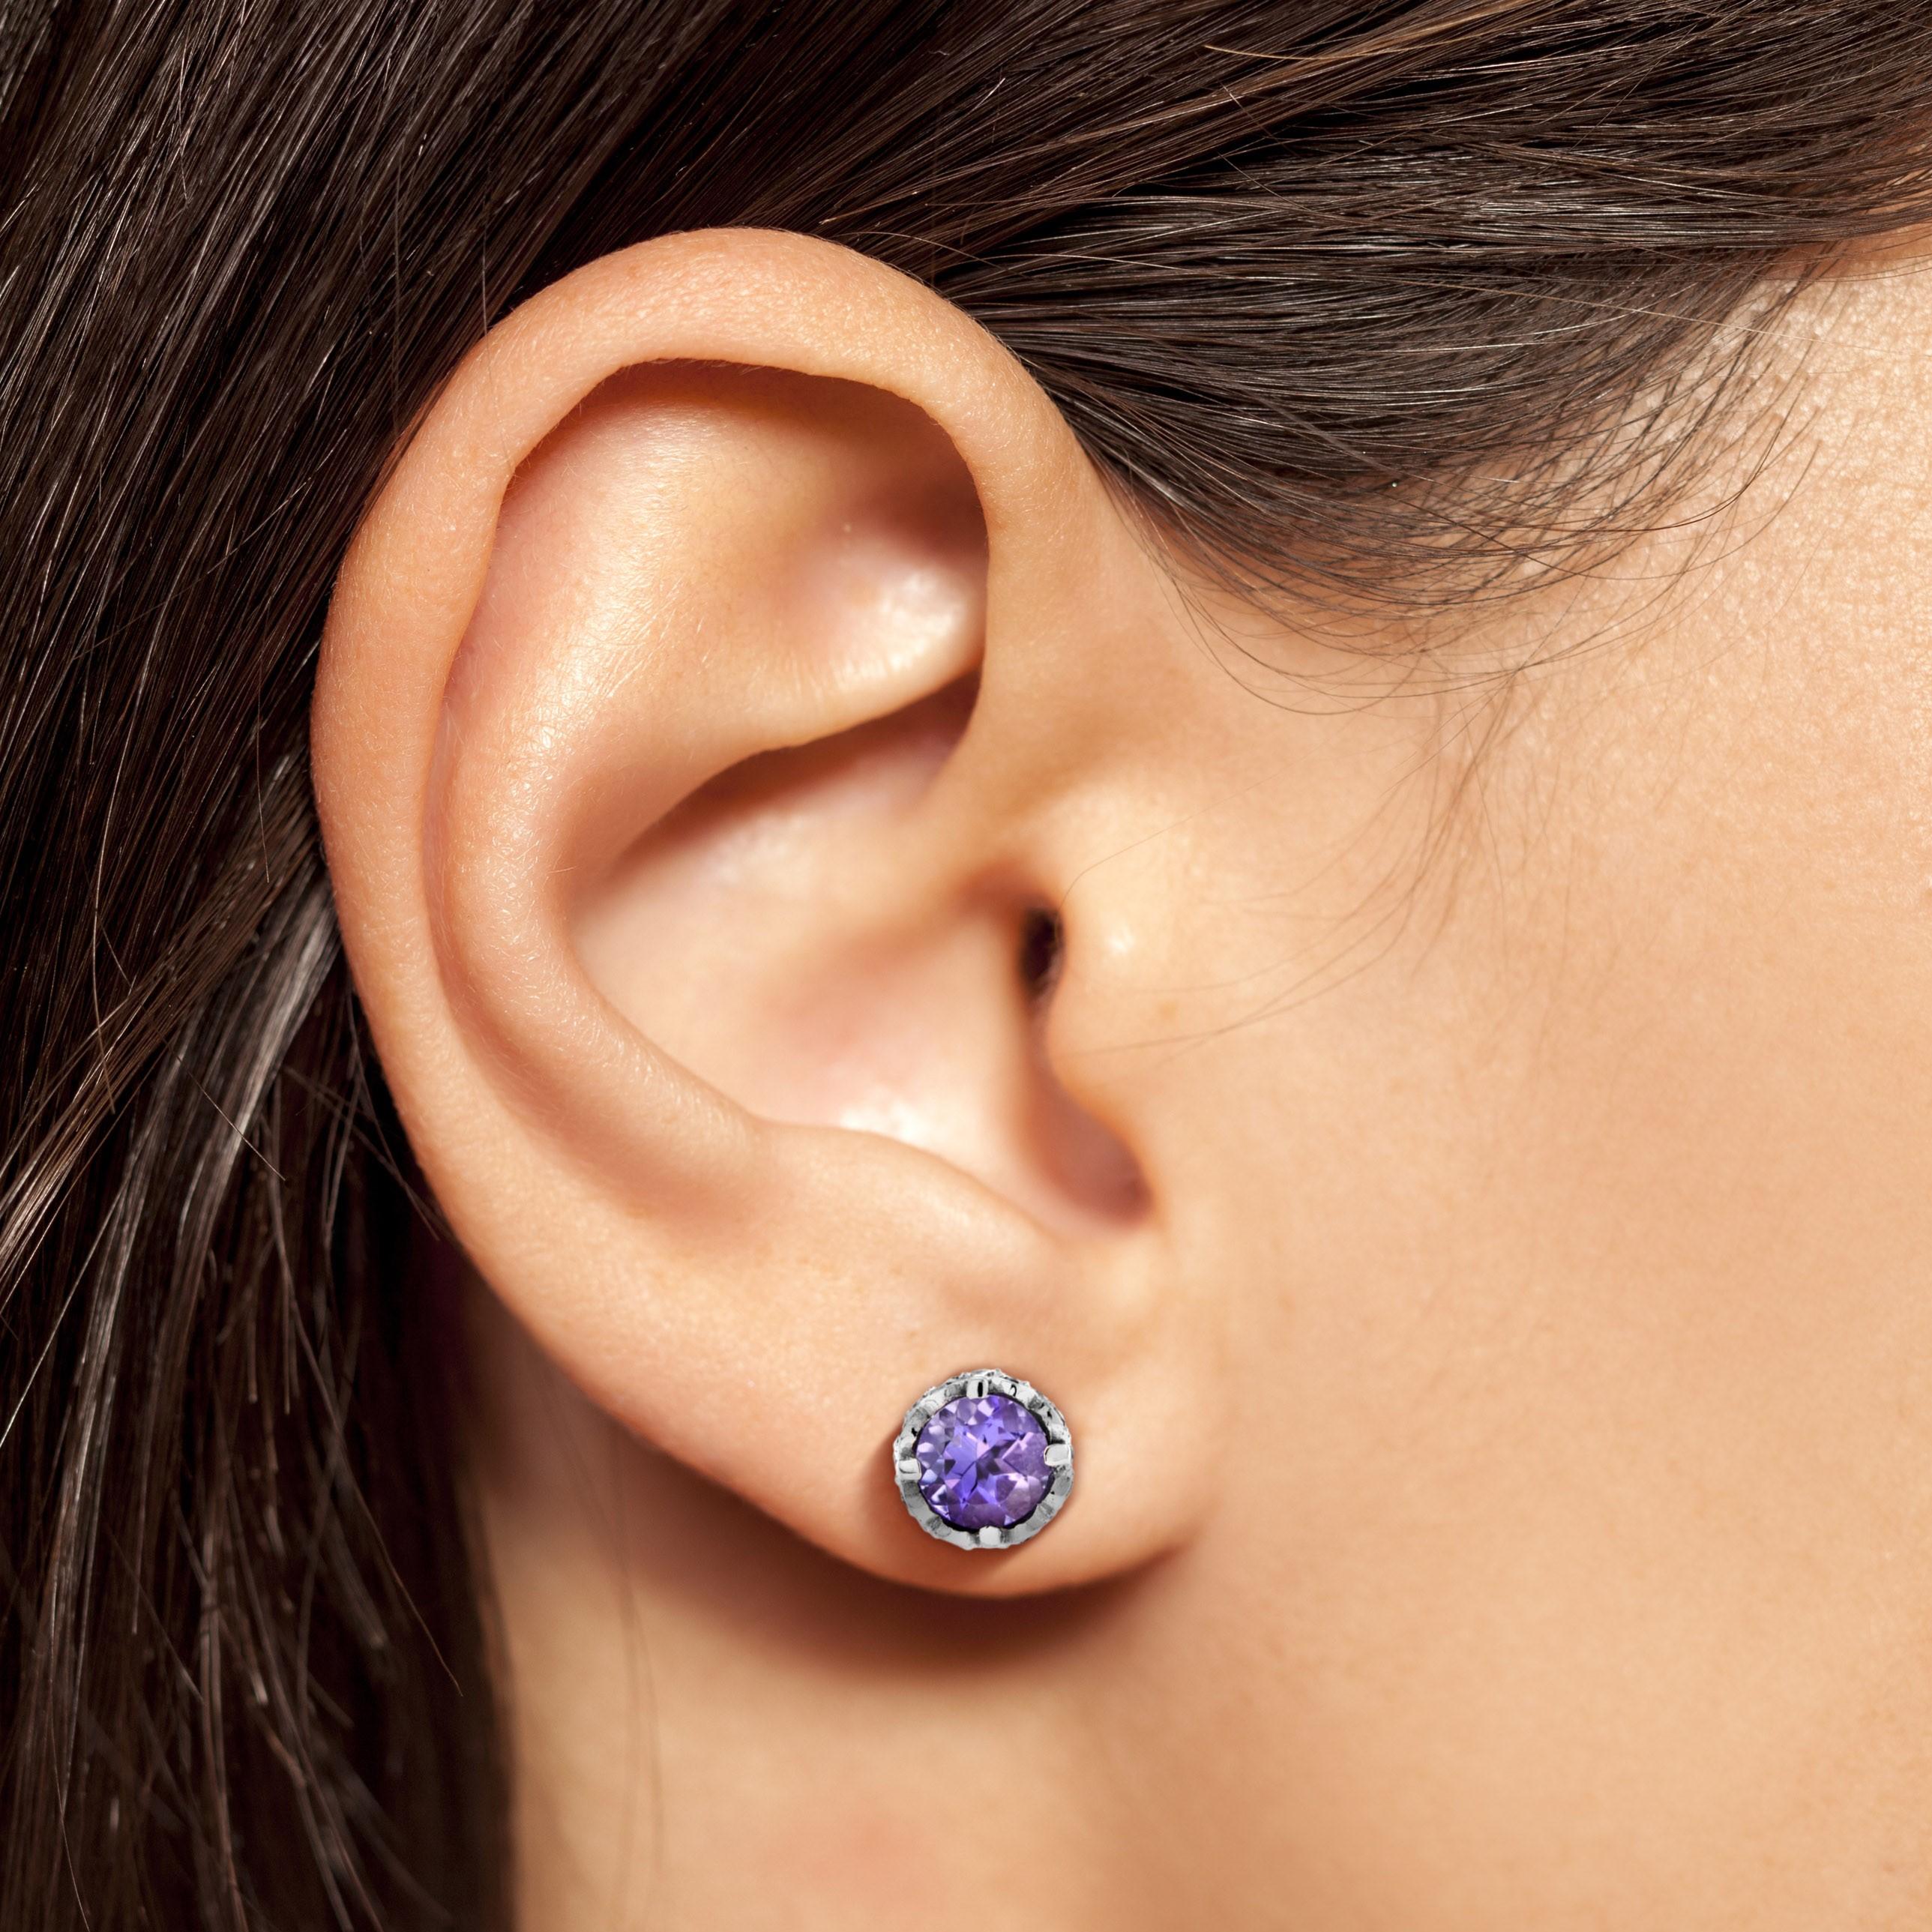 Simple, yet elegant, these earrings have an amethyst center stone with an enhanced design to add to the sparkle. Perfect for those casual occasions where you want to add a little bling. Or perfect to add an understated sparkle for a more formal